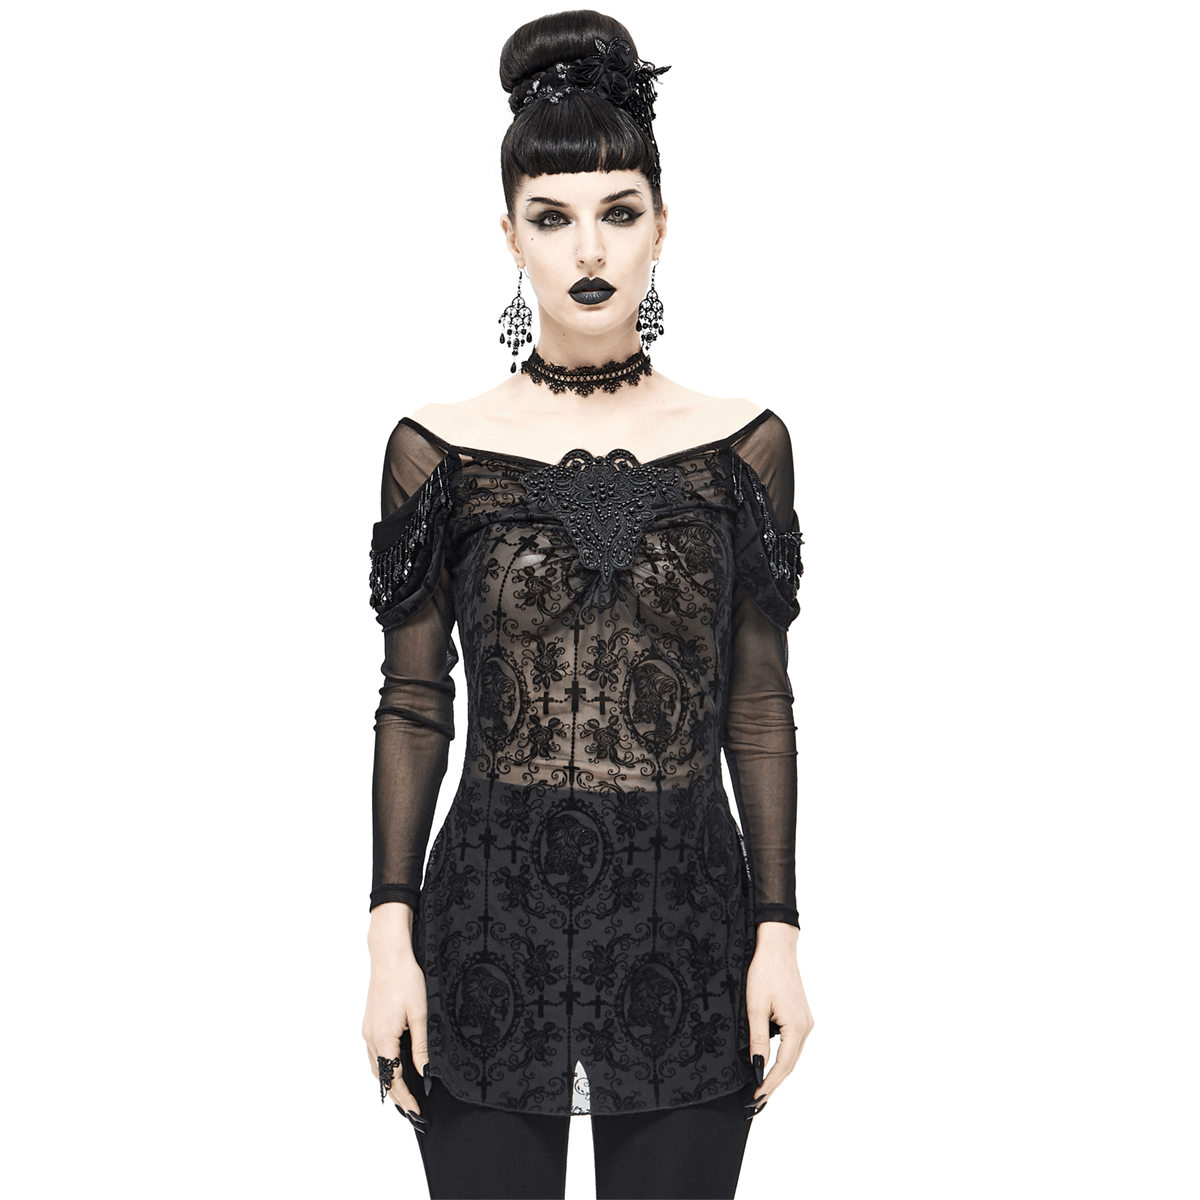 Women's Gothic Floral Embroidered Sheer Black Top / Fashion Female Lace Long Sleeve Tops - HARD'N'HEAVY